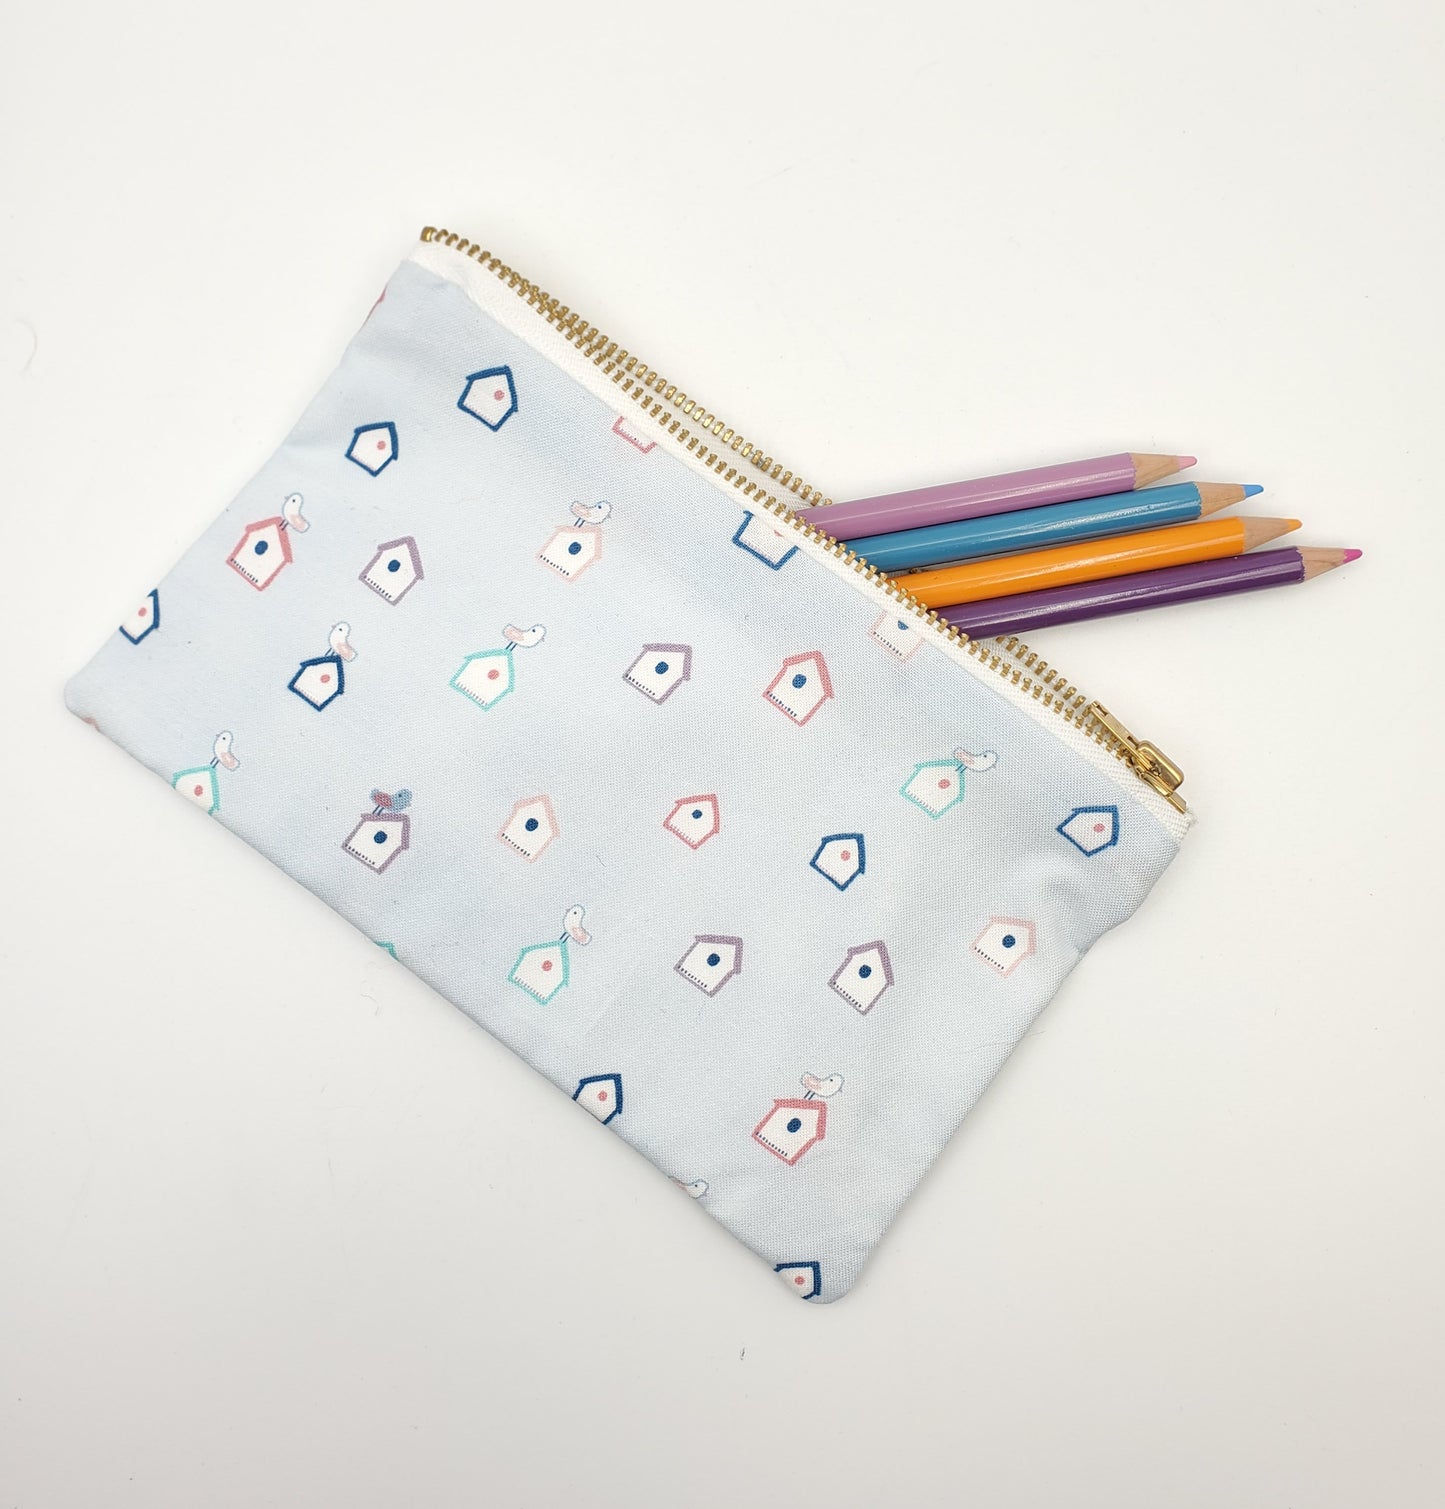 Fabric Bags - by This & That Design Co